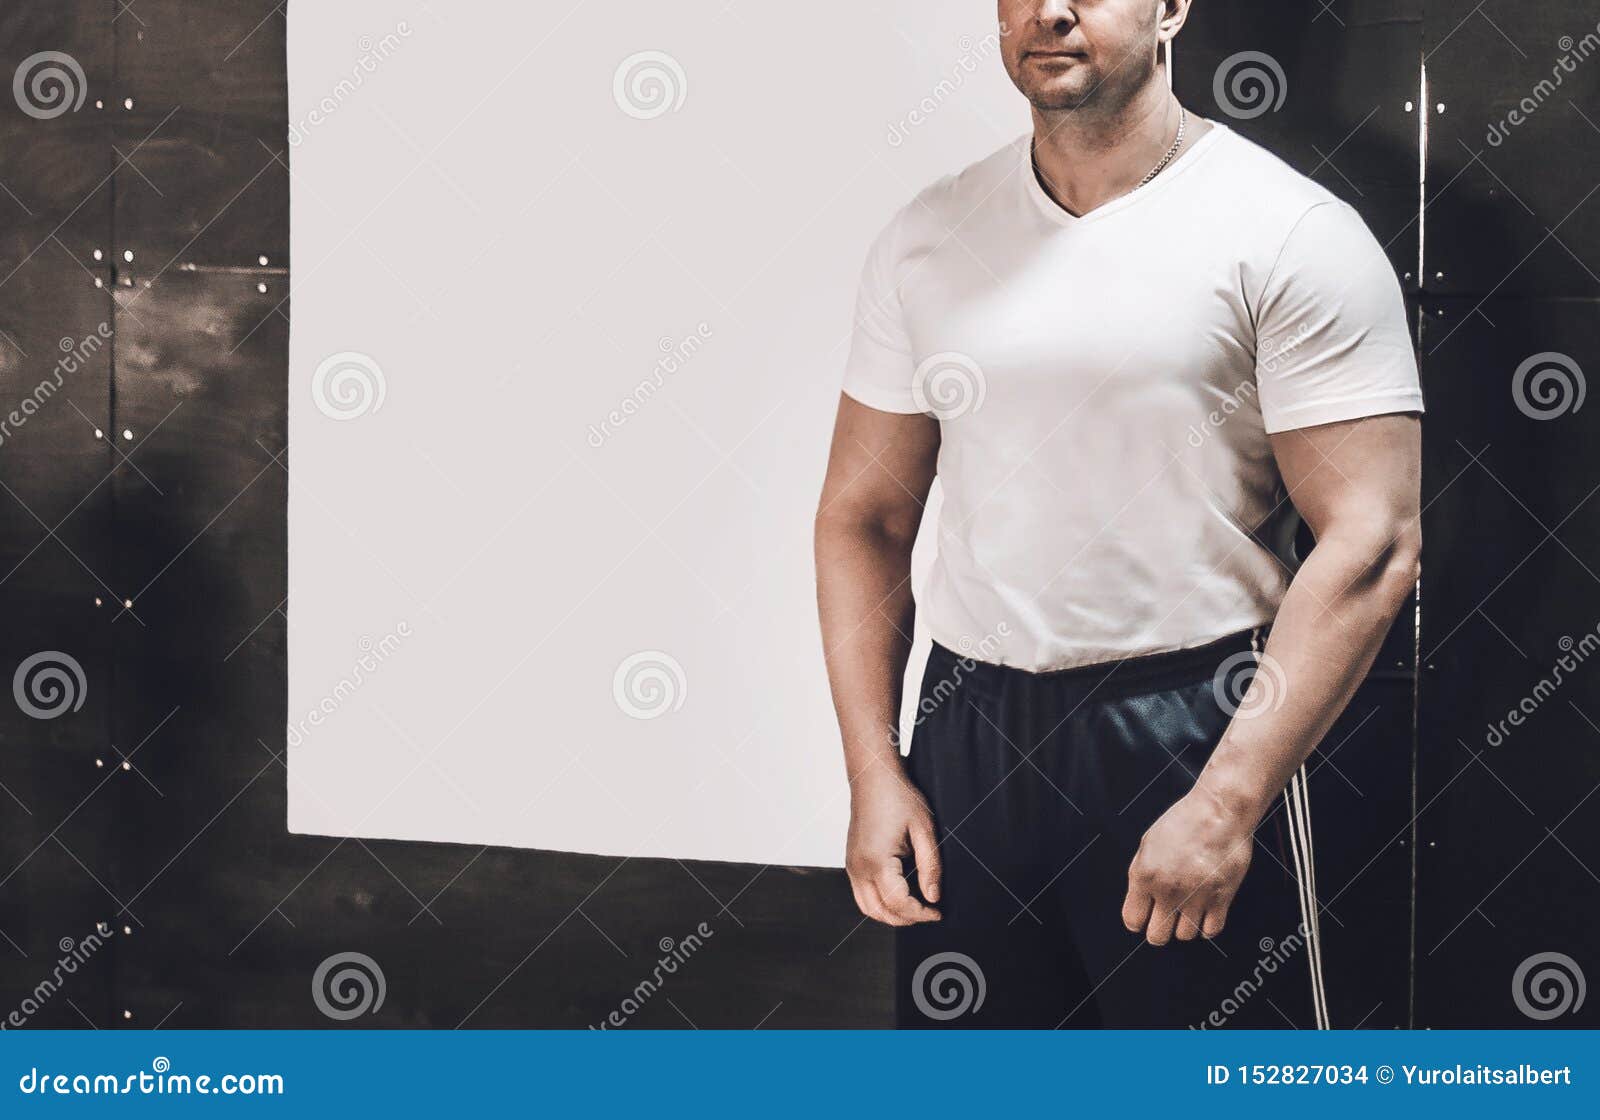 Bodybuilding Coach Standing in His Fitness Center. Editorial Stock